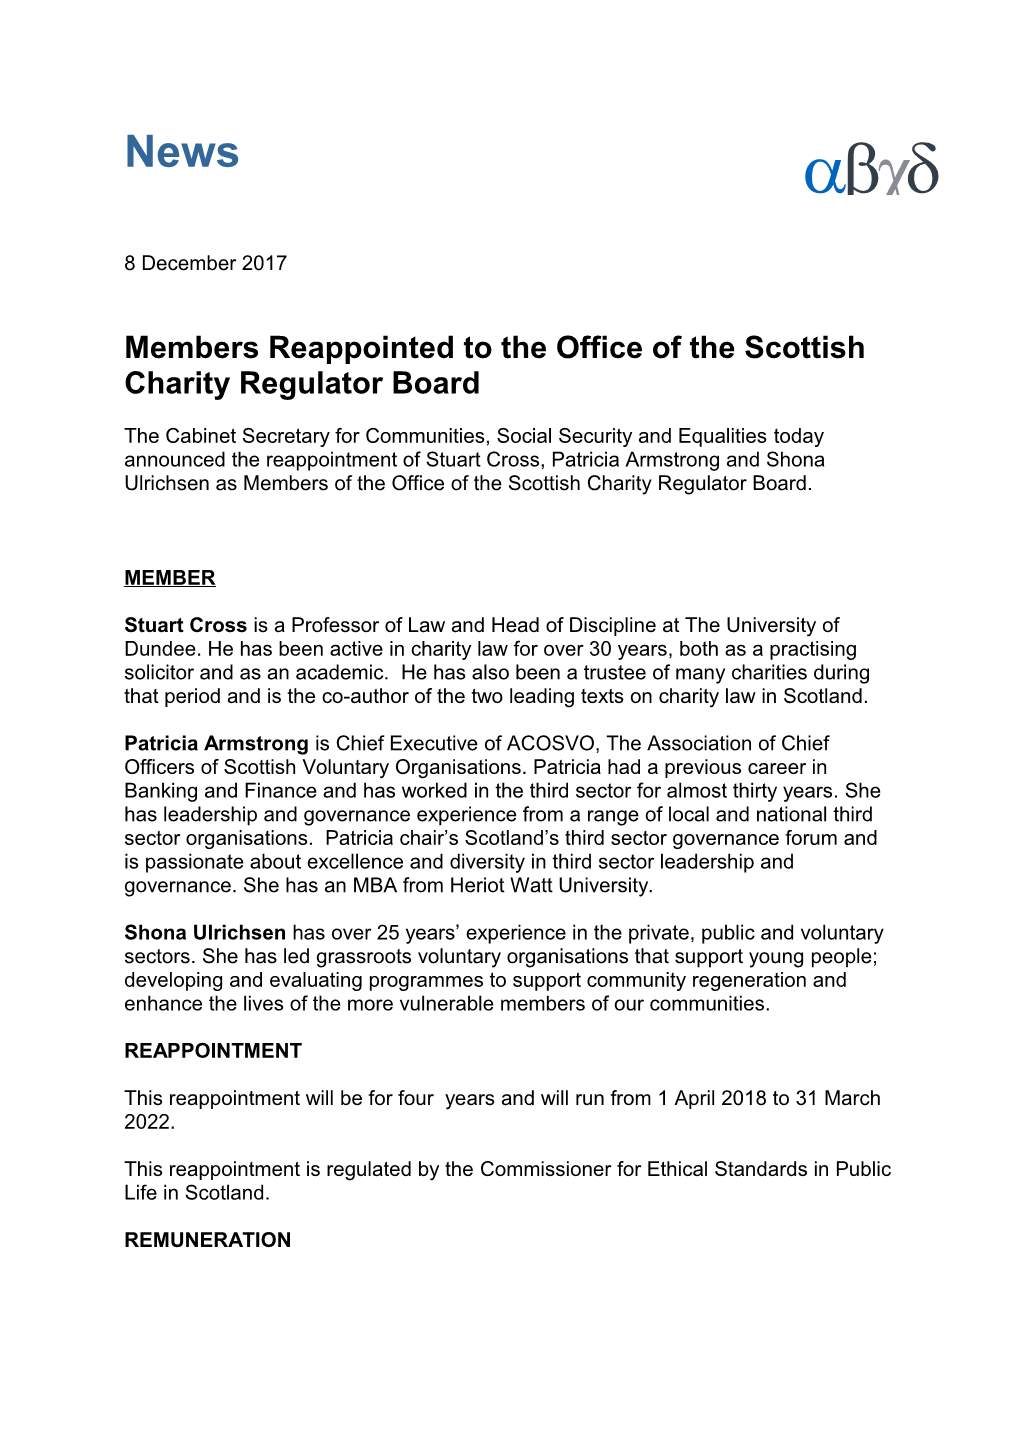 Members Reappointed to the Office of the Scottish Charity Regulator Board